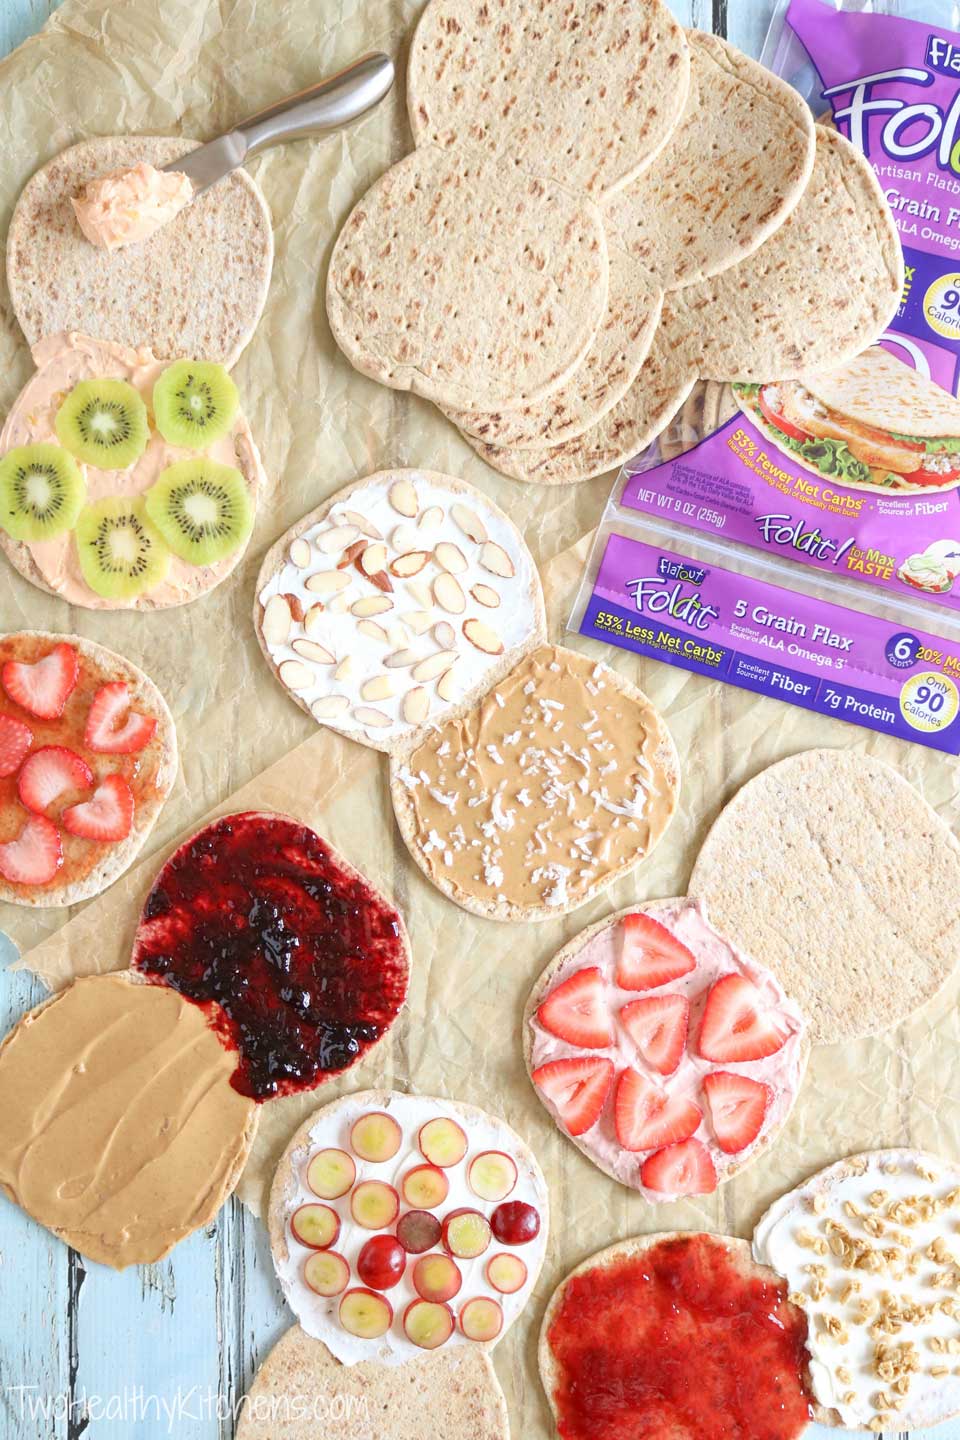 Kids will love this adorable sandwich recipe! Use it as a fun edible art project ... or as a special little lunch box surprise! Choose basic peanut butter and jelly, or one of our other creative filling ideas (even lots of nut-free options for school lunches)! AD | www.TwoHealthyKitchens.com